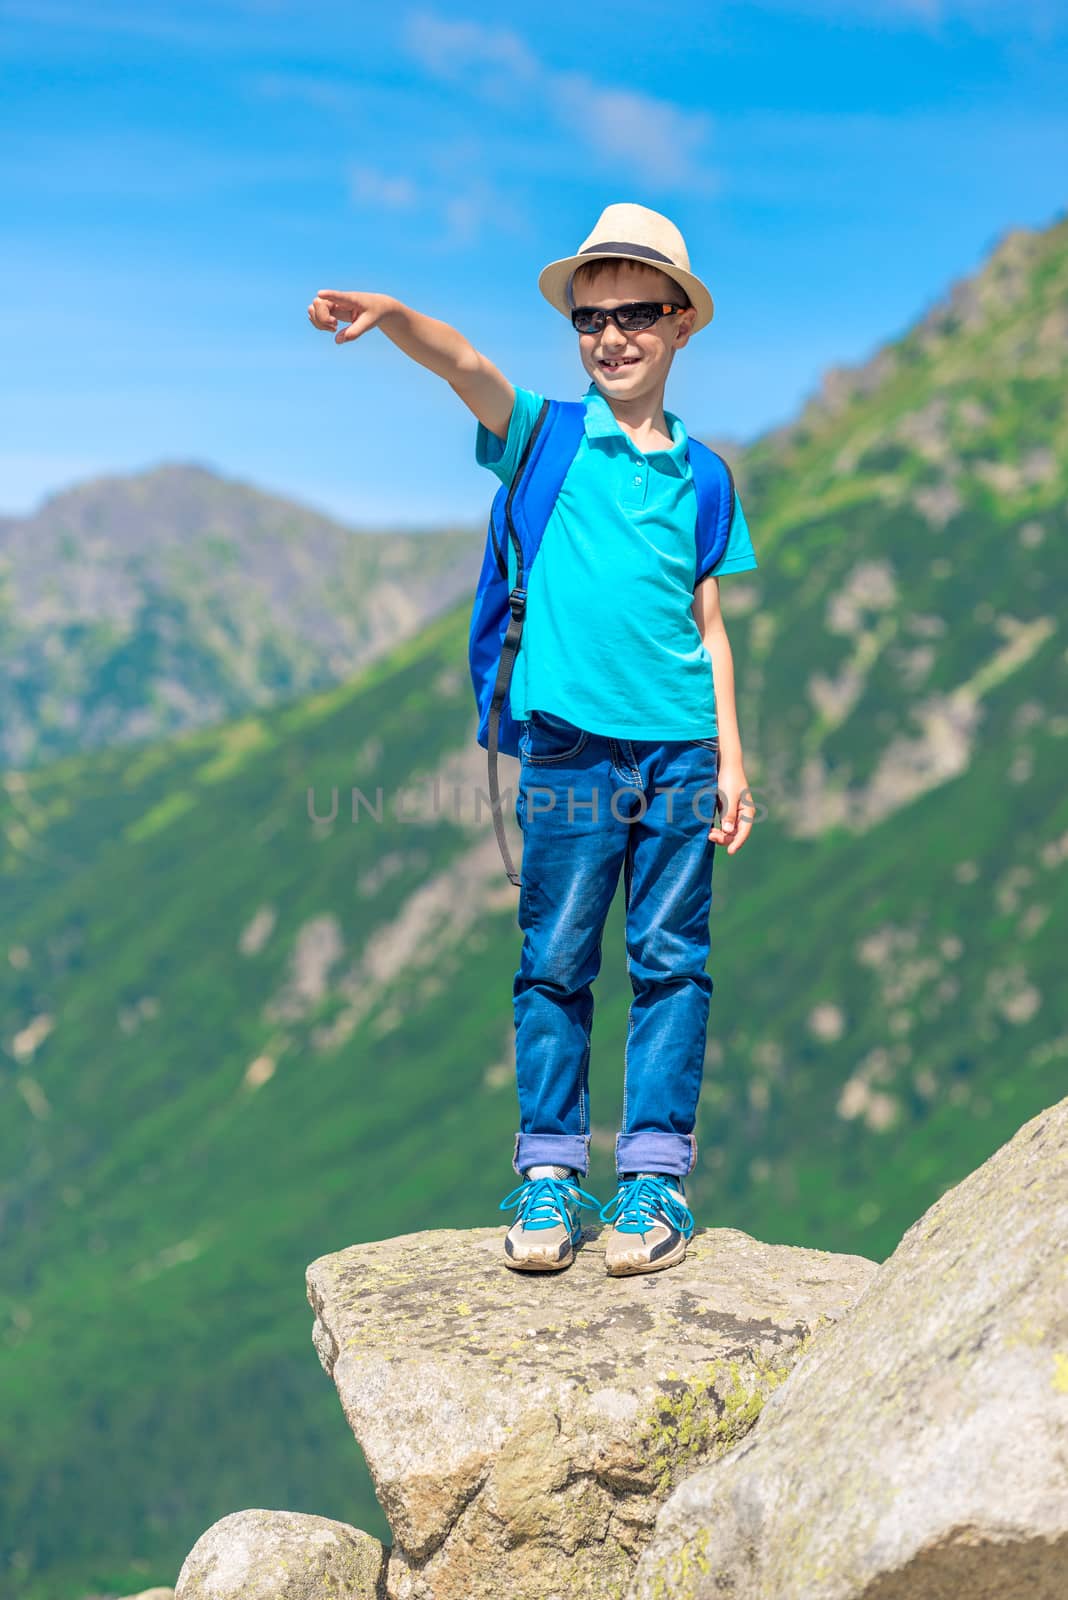 boy traveler stands on a rock and shows up a mountain